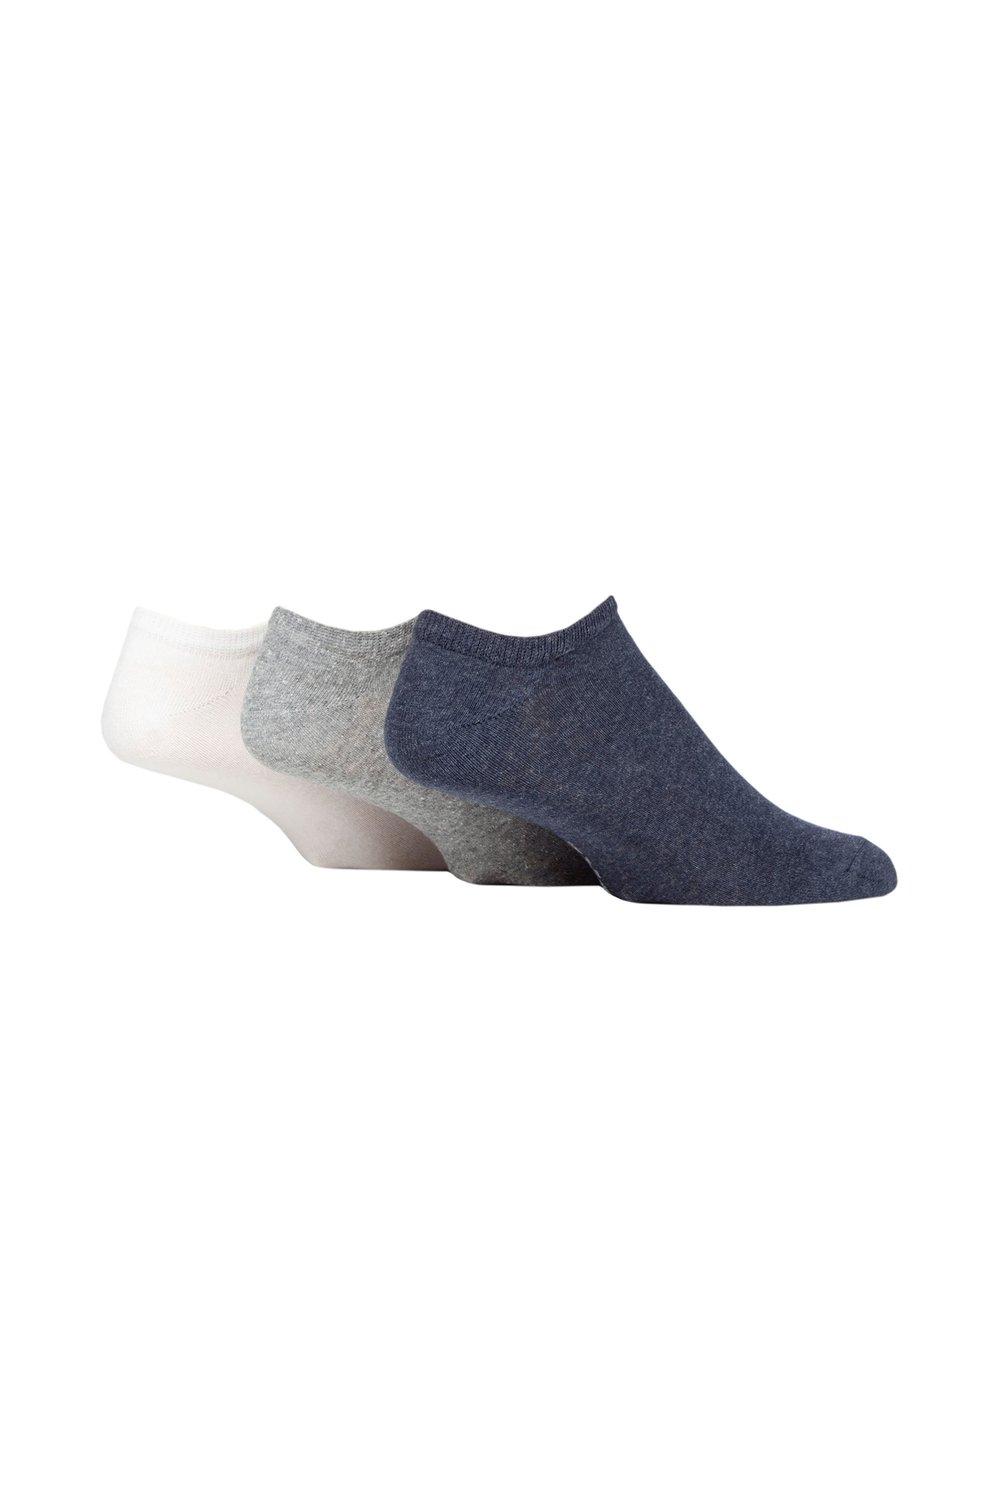 3 Pair 100% Recycled Plain Cotton Trainer Socks